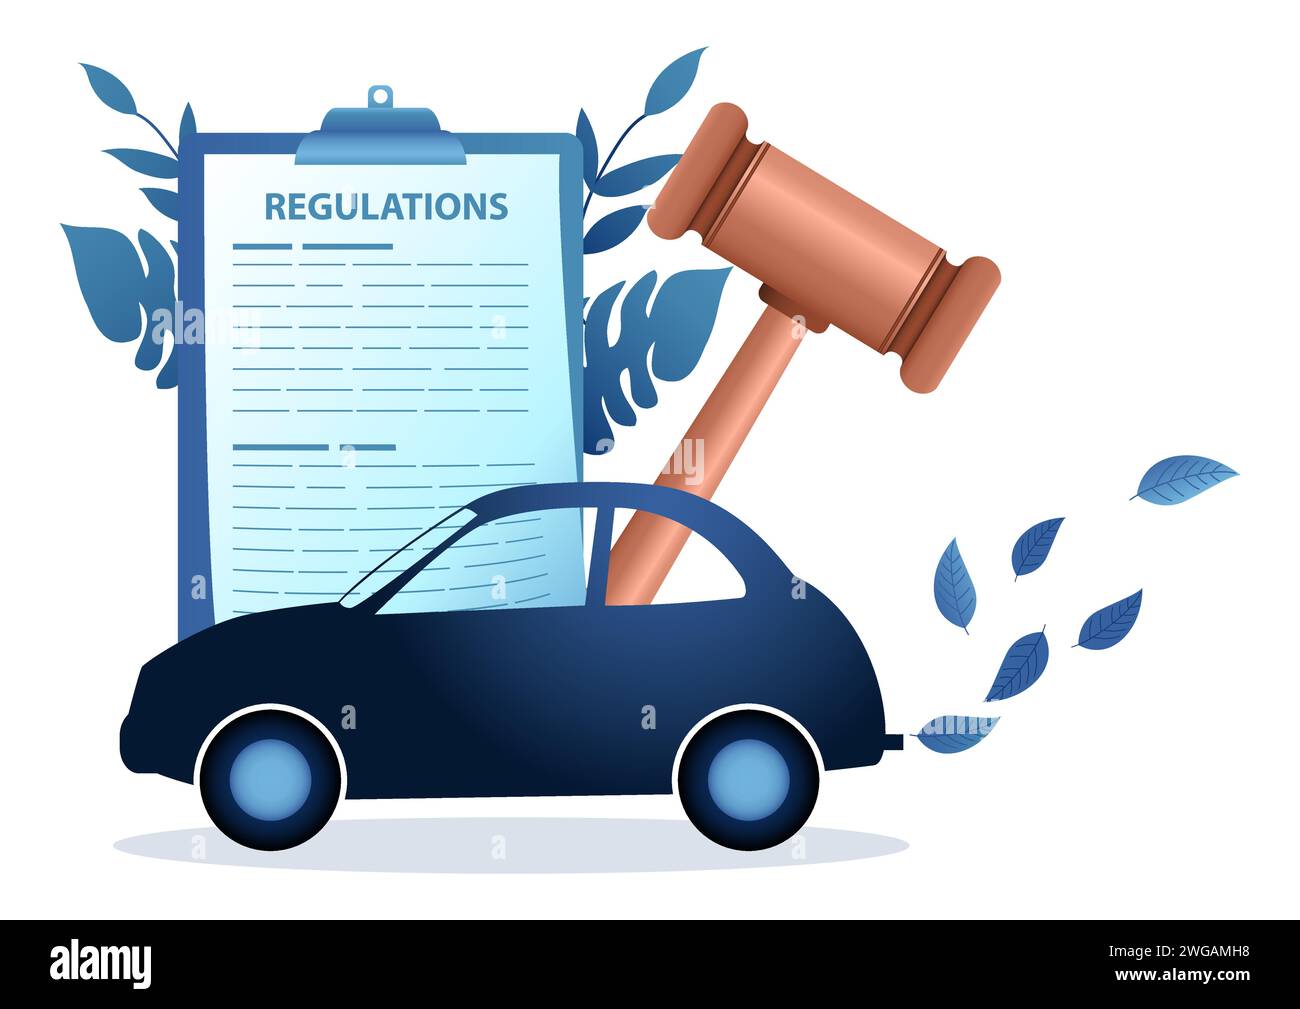 Car produced clean emissions with gavel justice and regulations document on the background, car emissions regulations vector illustration Stock Vector